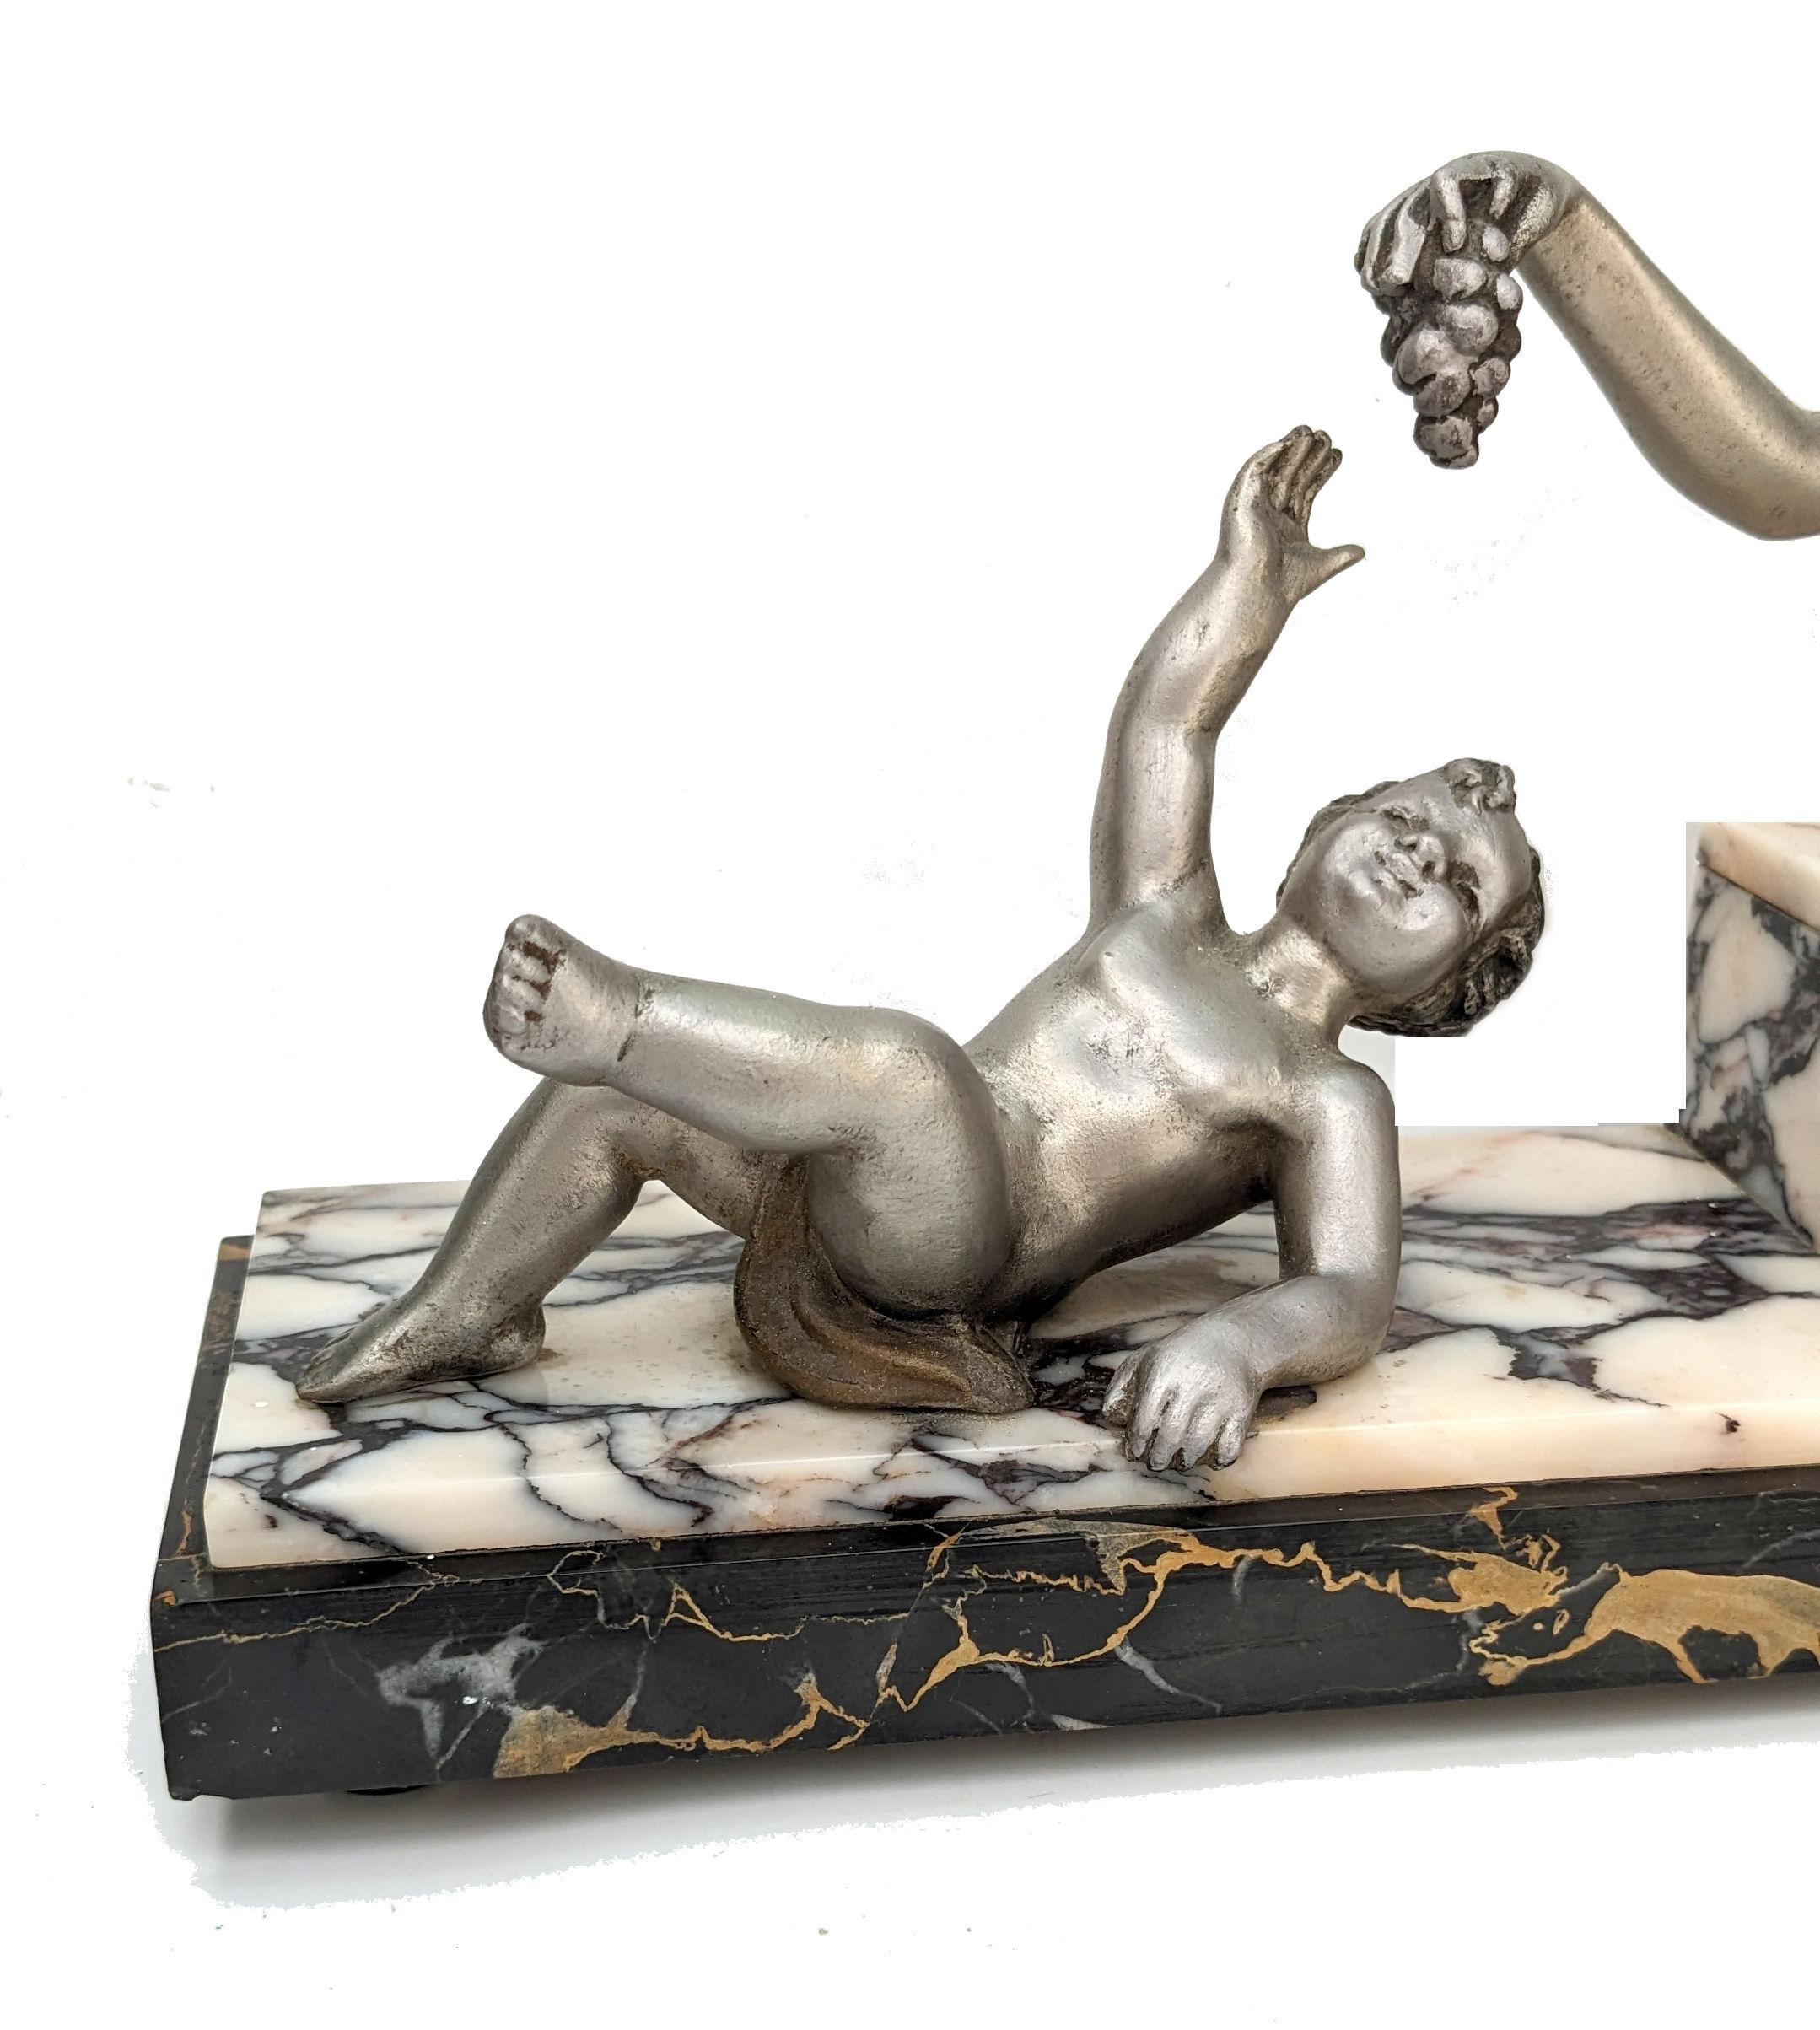 For your consideration is this large French figural group on a tri coloured sold marble base, dating to the 1930's. Features a female out stretched offering grapes to a cherub young boy. Made from spelter and gilded on top in soft tones of silver,